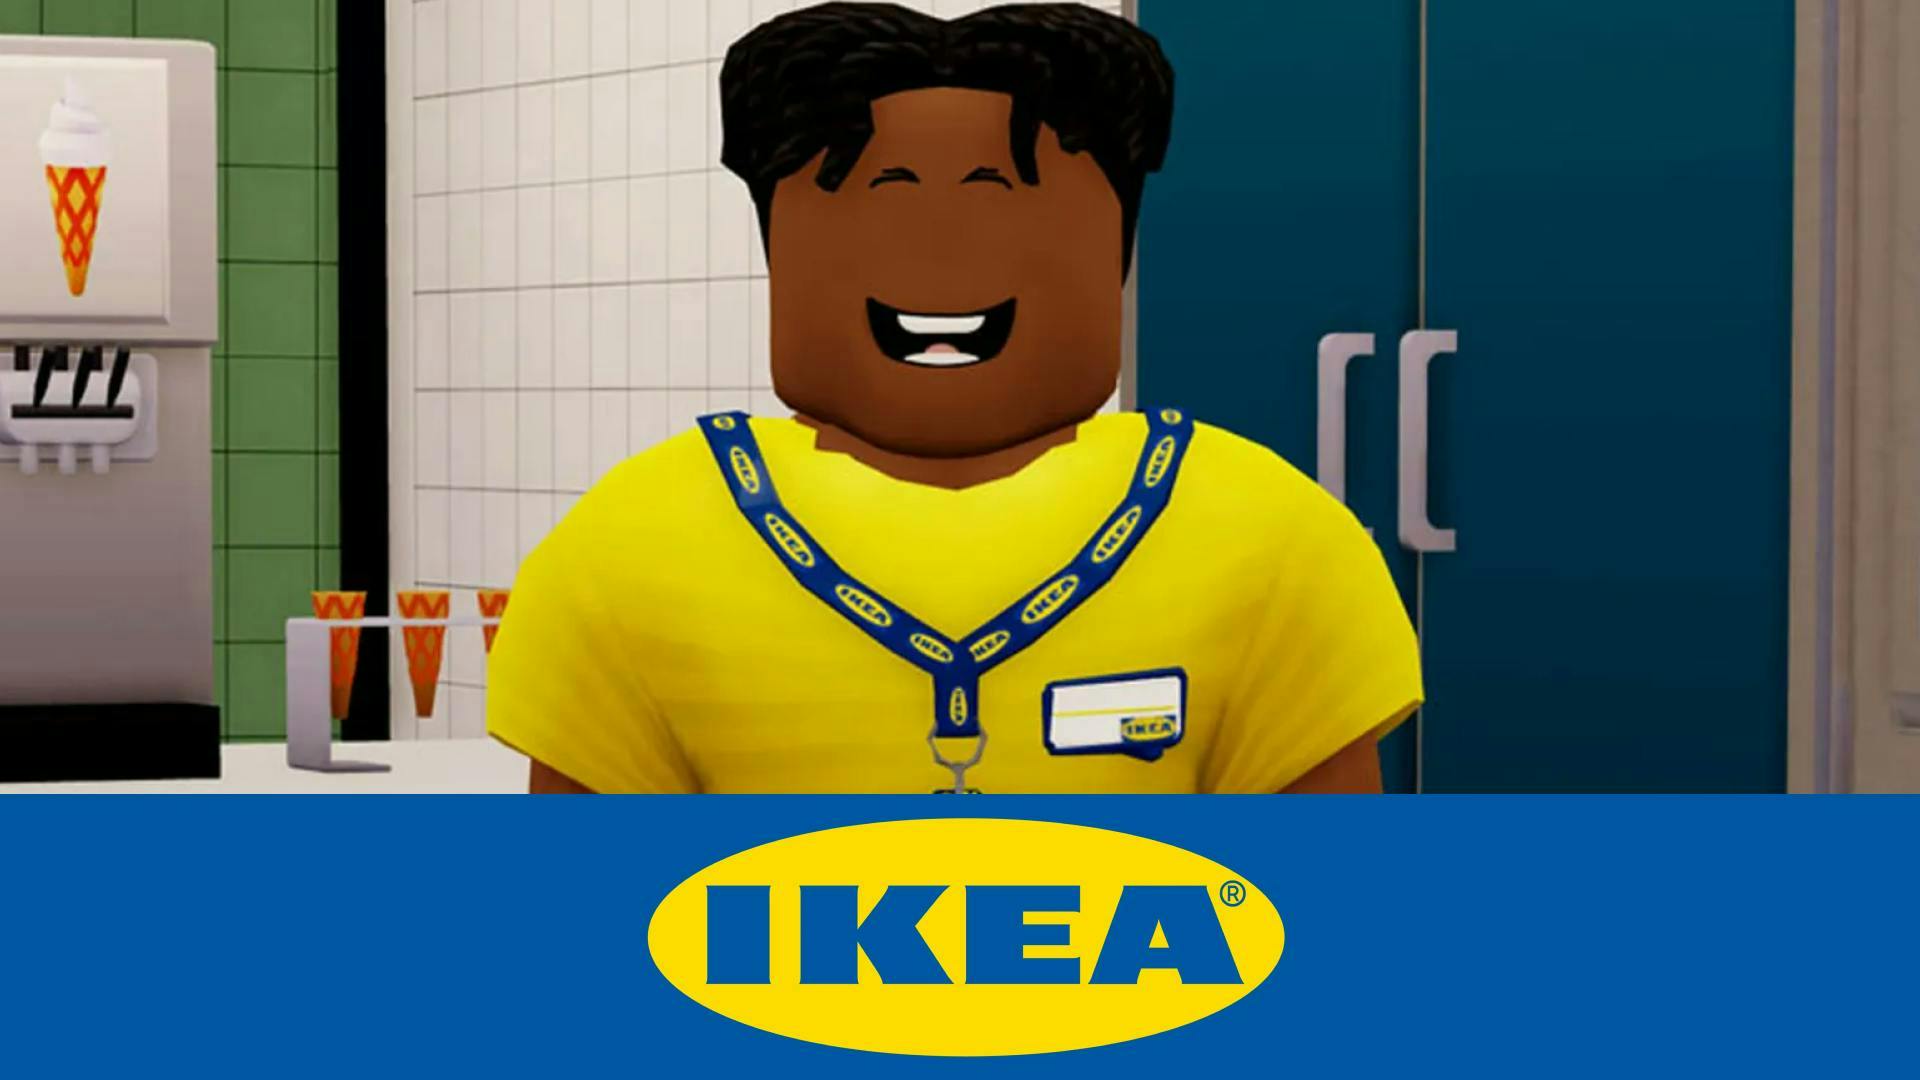 Ikea Hiring Real Employees to Work Inside Roblox